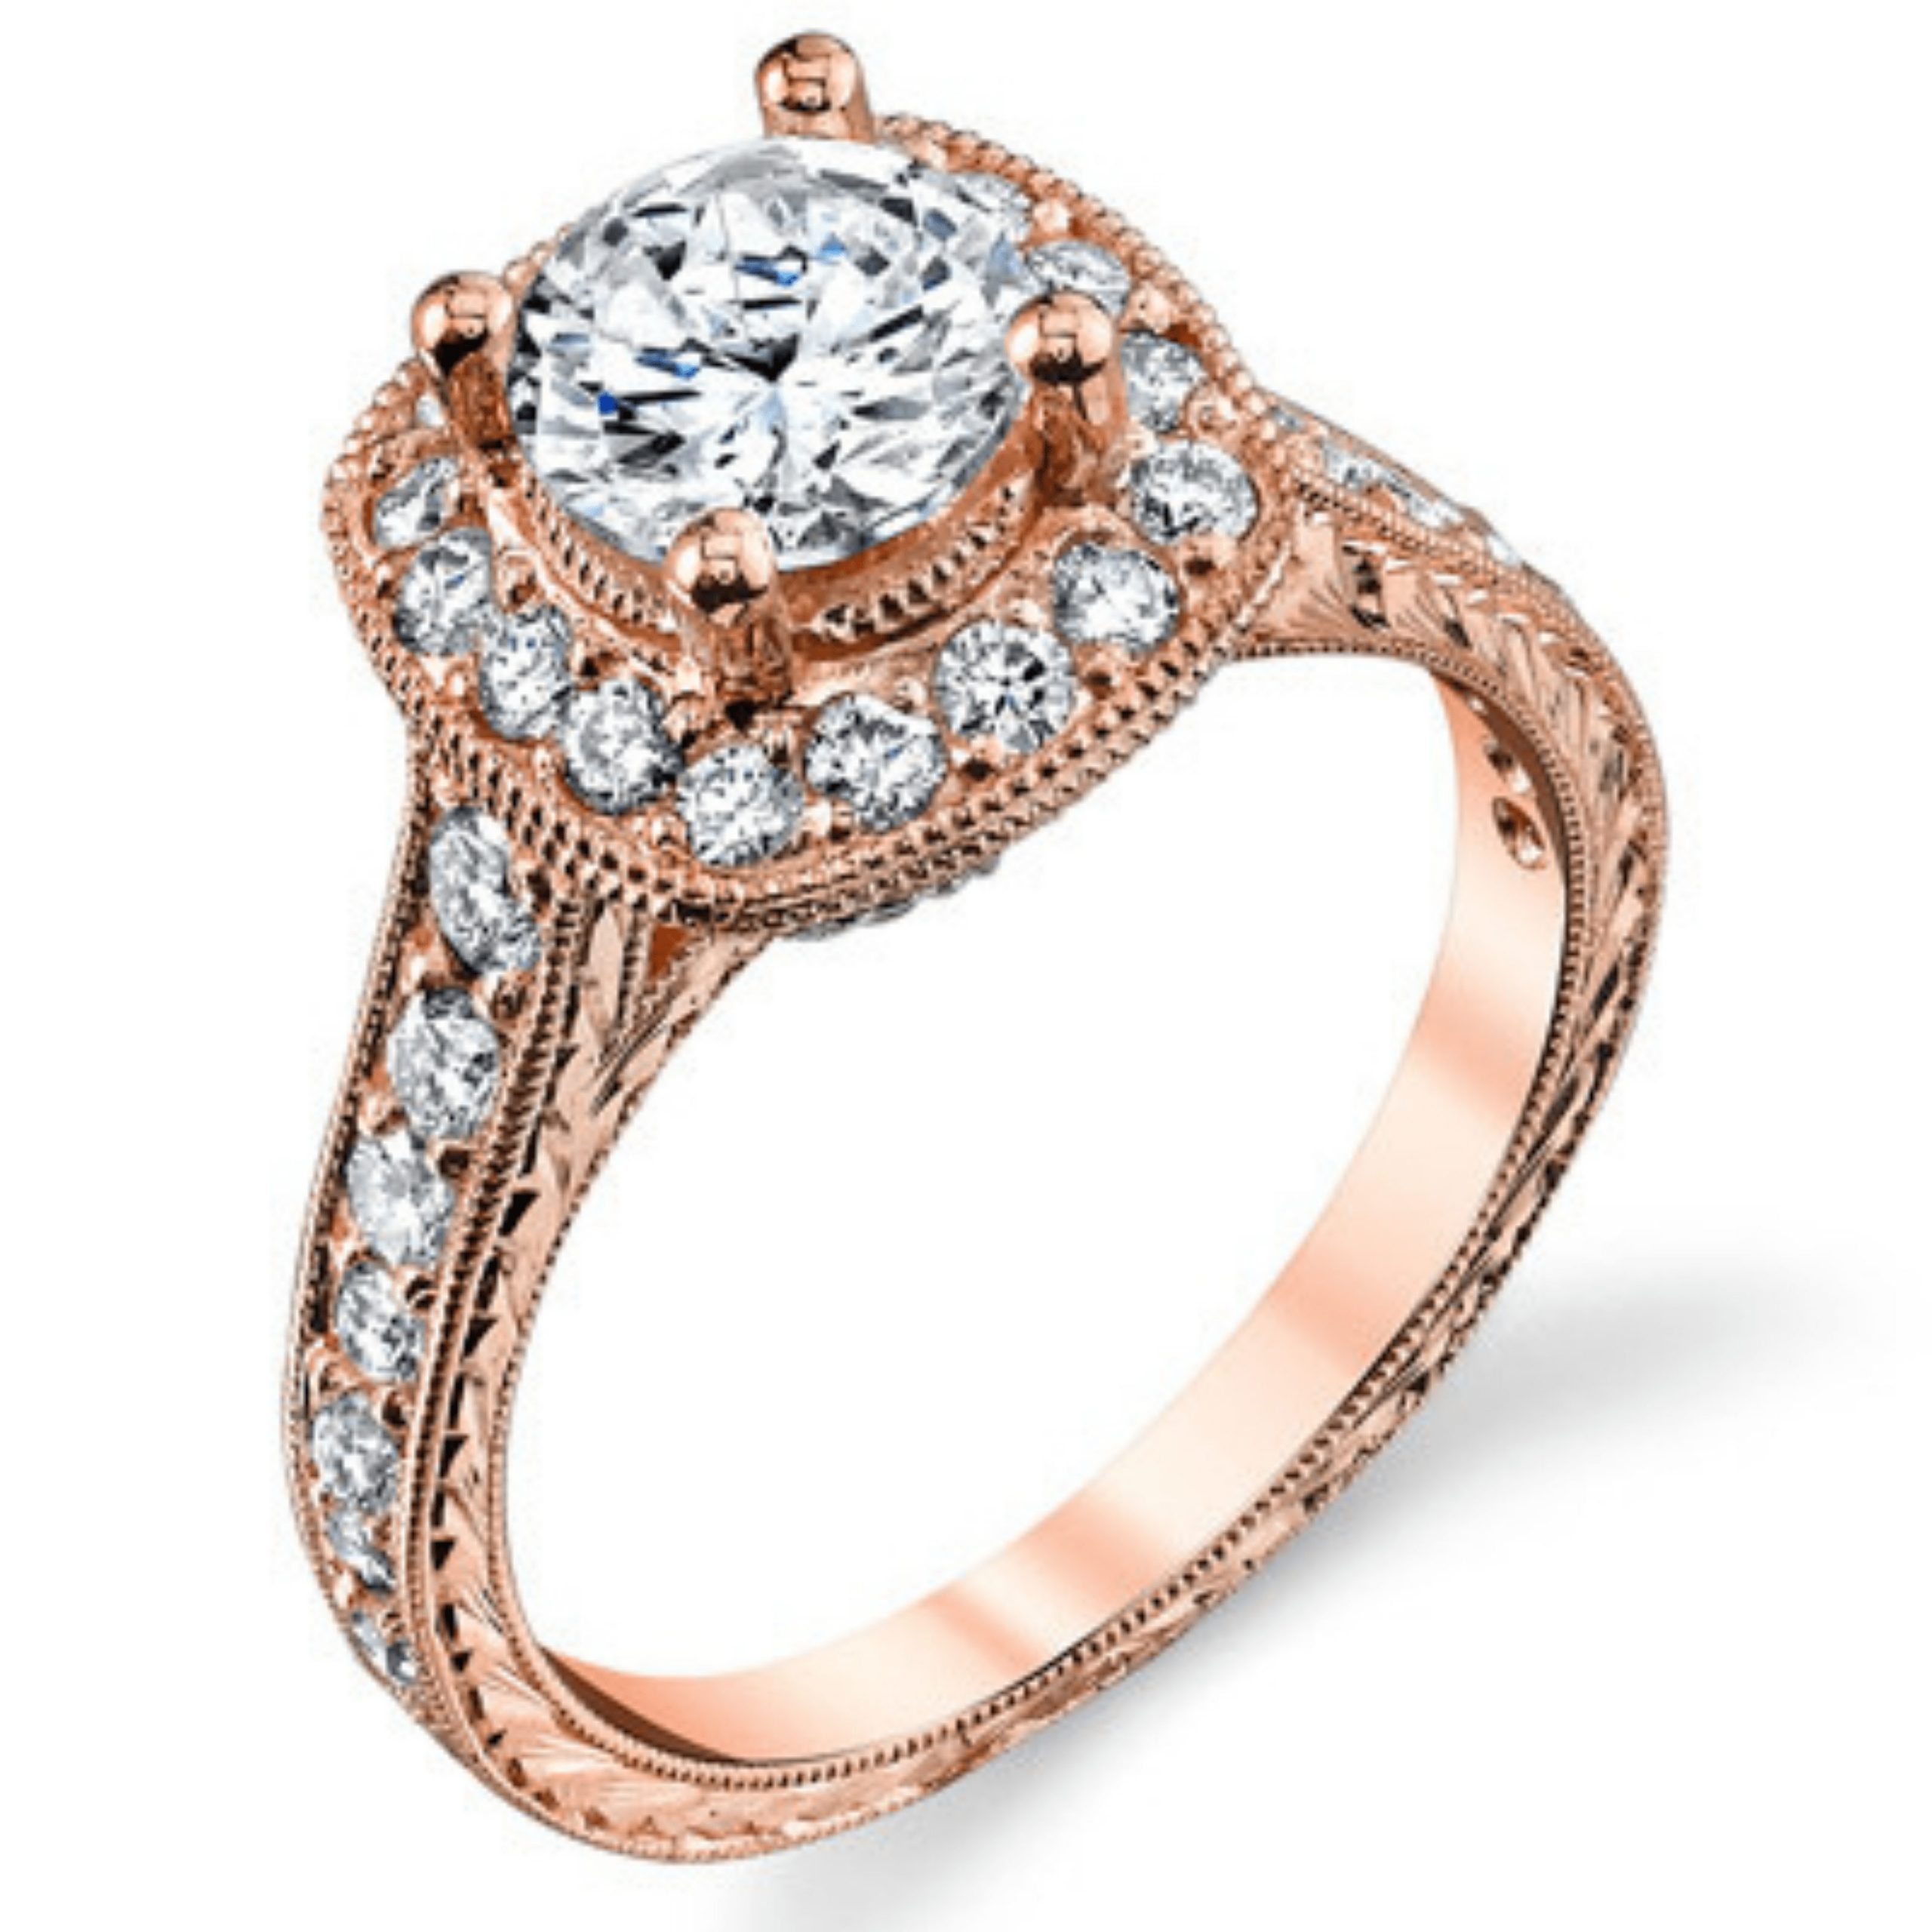 Two Toned White and Rose Gold Diamond Halo Engagement Ring – bbr372-rose